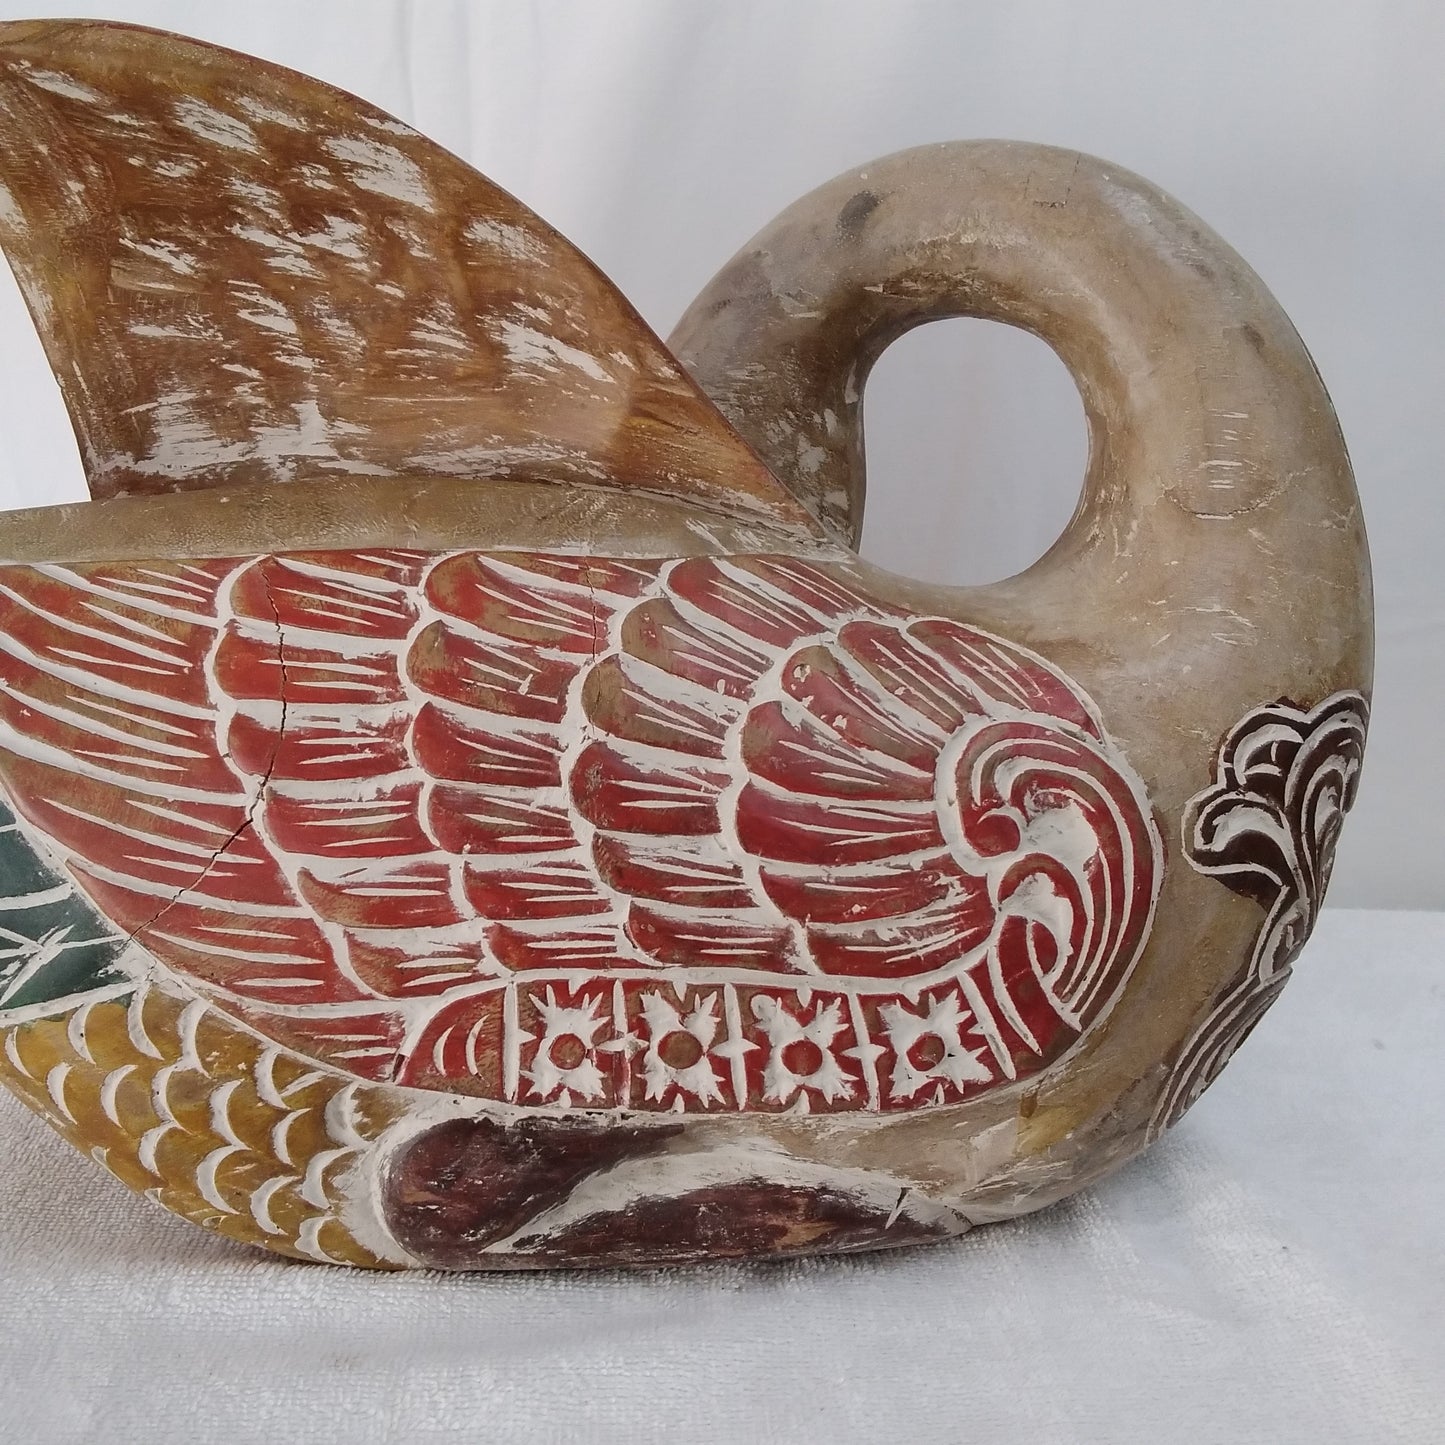 Rare Hand Carved, Hand Painted Wooden Goose Sculpture